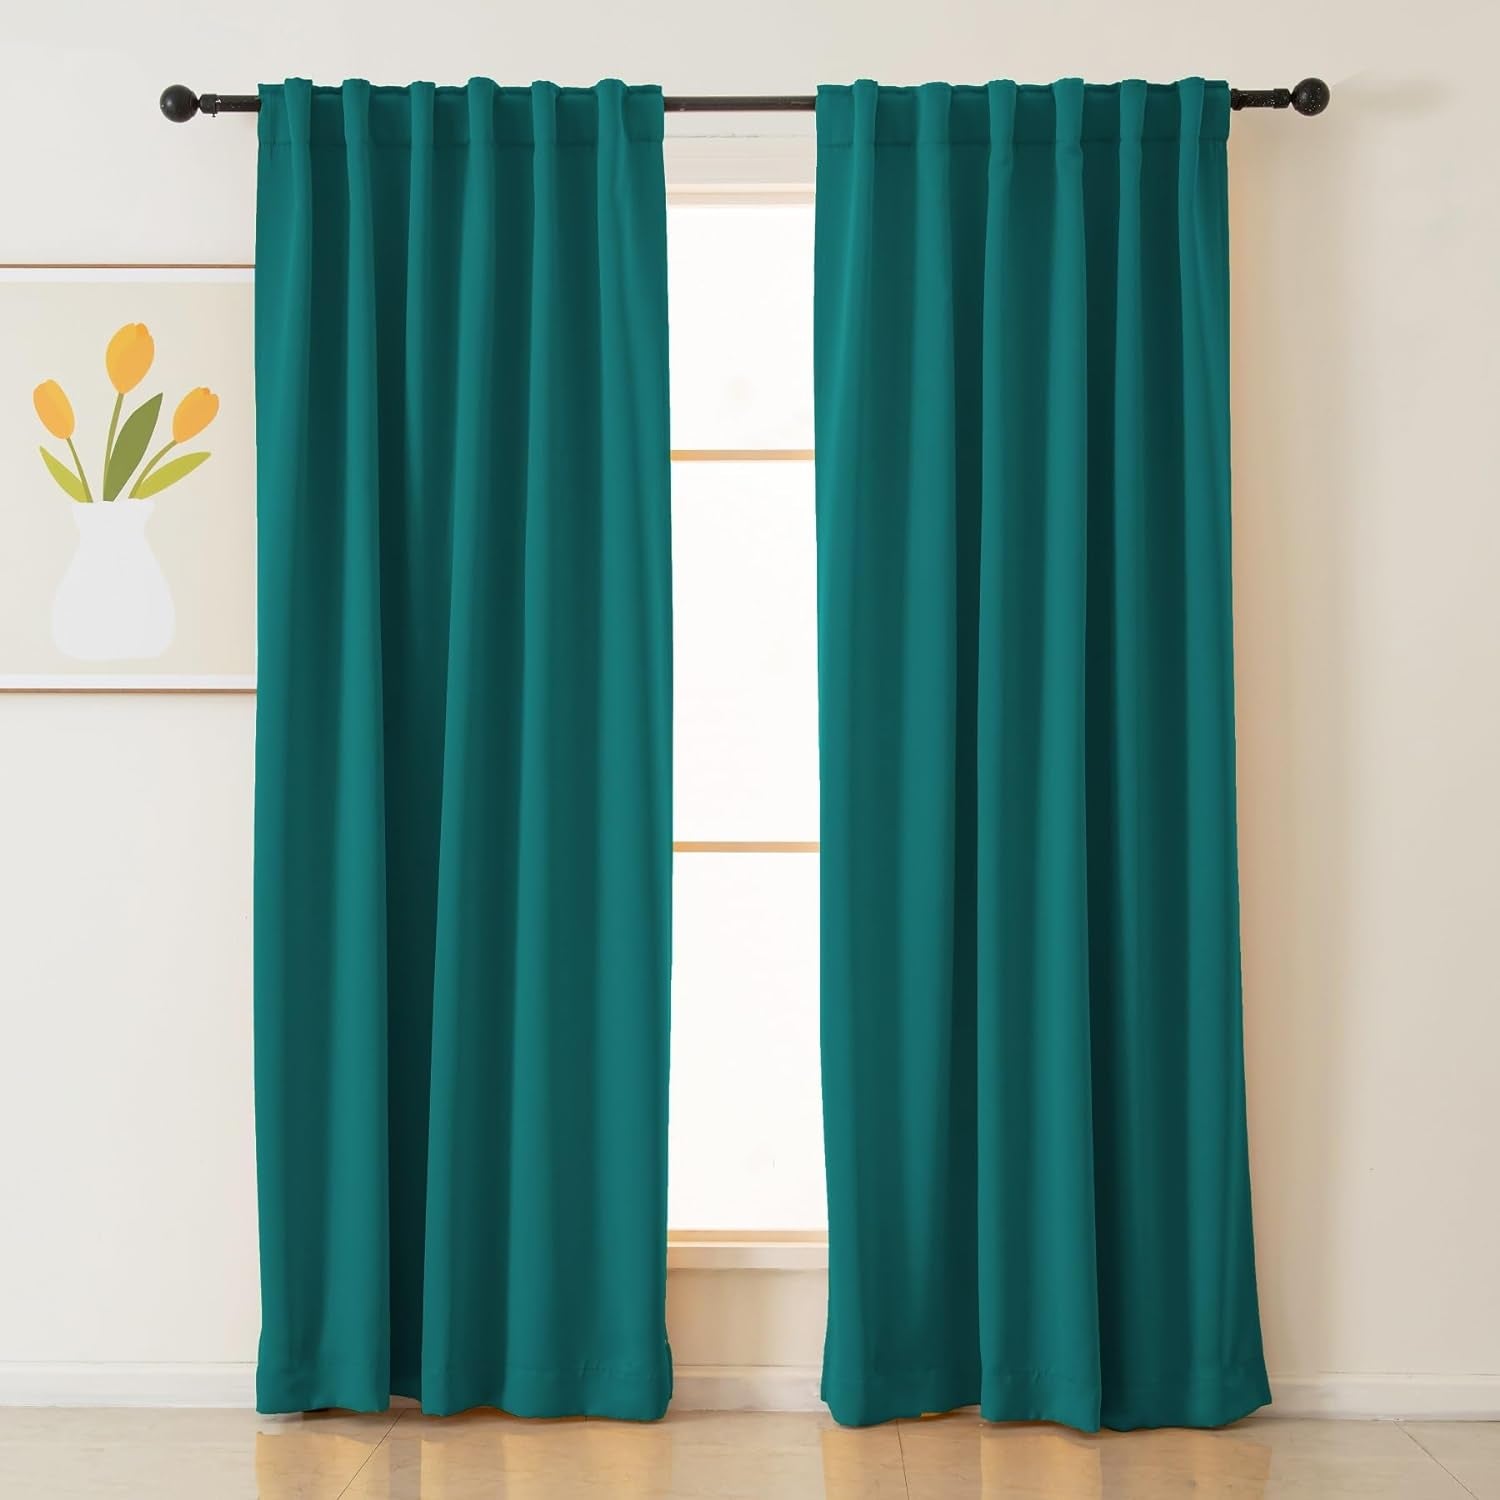 Pickluc Blackout Curtains 96 Inches Long 2 Panels, Black Out Drapes for Bedroom or Living Room, Back Tab and Rod Pocket Top, Set of Two, Dark Grey, 52" Wide and 96" Length.  Pickluc Teal 52"W X 96"L 